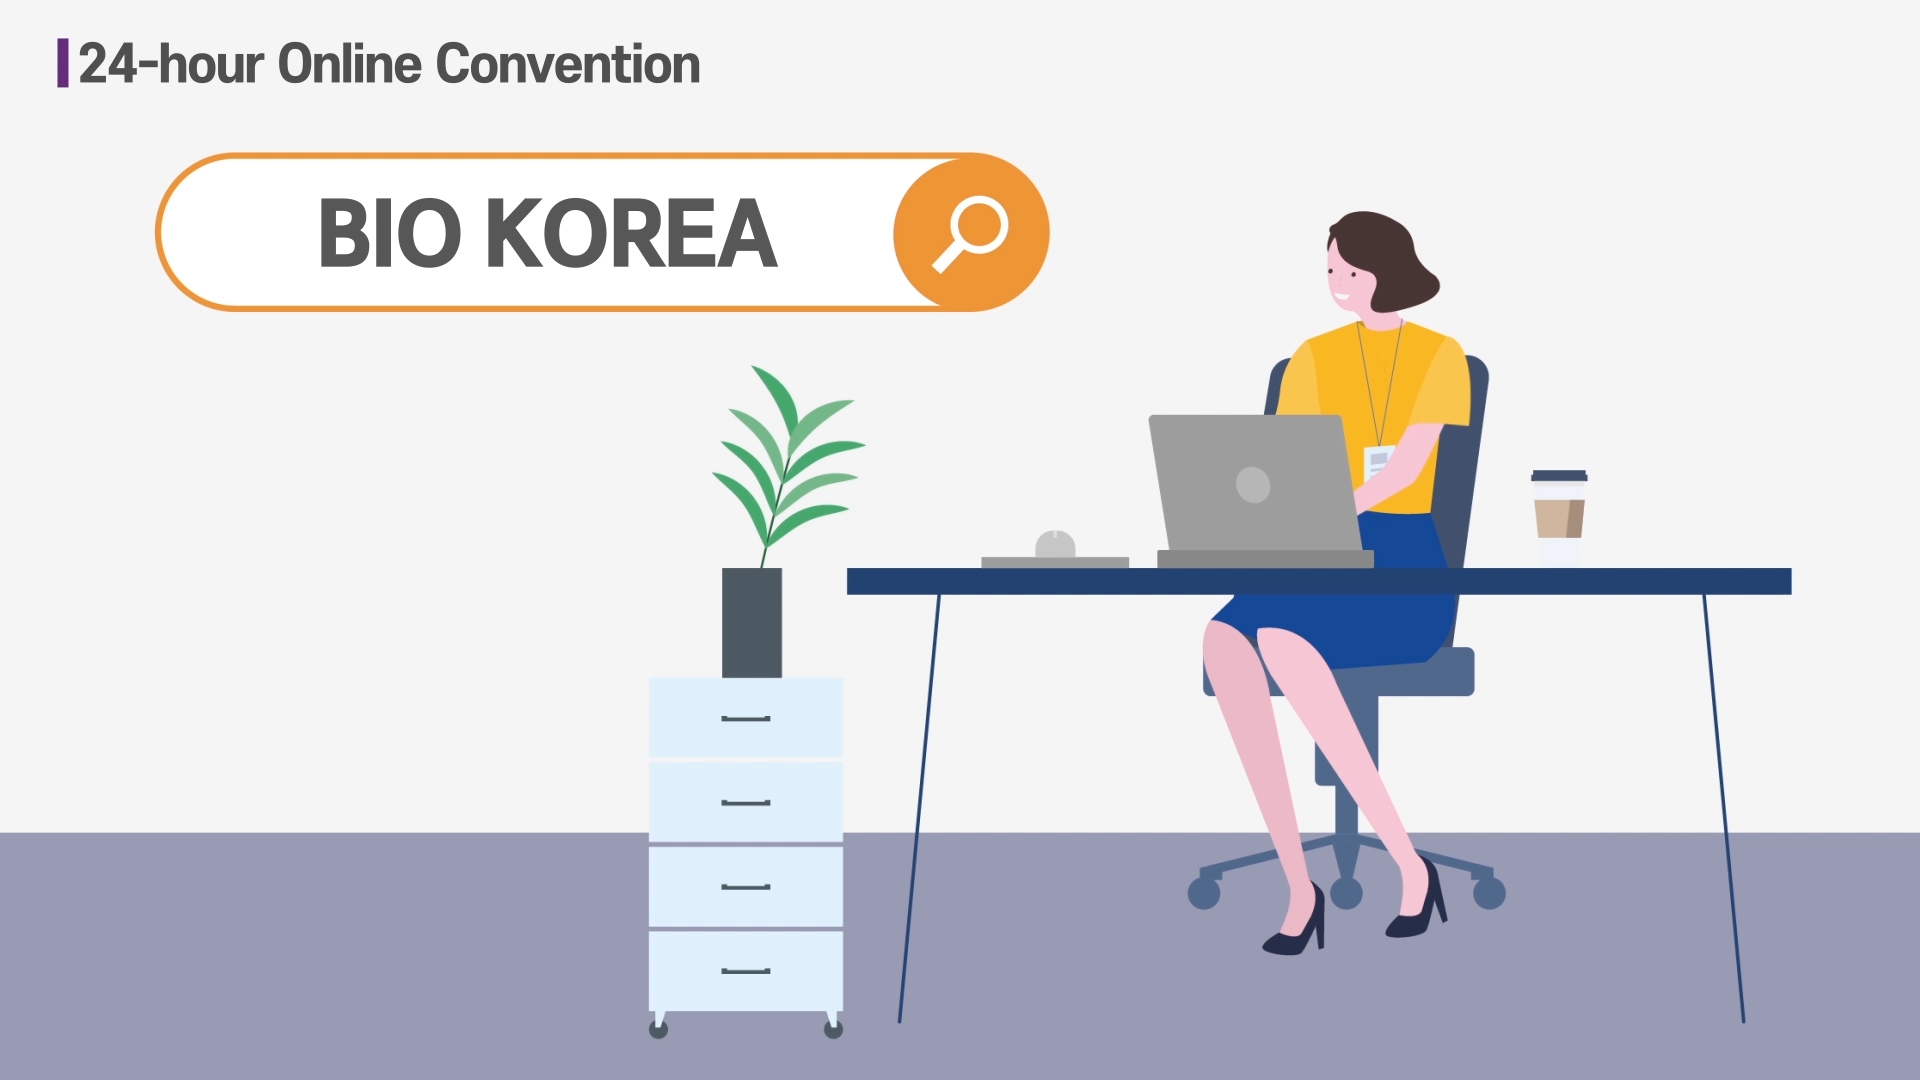 BIO KOREA 2021 International Convention is held online from 9th to 21st June 2021 with an onsite show at COEX in Seoul from 9th to 11th June. Under the main theme of “New Normal: Breaking Barriers with Bio Innovation”, BIO KOREA 2021 consists of five main programs including Conference, Business Forum (Partnering and Company Presentation), Exhibitions, Invest Fair, and Job Fair. It will connect companies and professionals to find new business opportunities and enhance the capacity for global networking. Especially Korean innovative pharmaceutical and medical device companies, start-ups in the digital health and biotech industries, and K-Quarantine-related companies would be available to meet at BIO KOREA 2021.